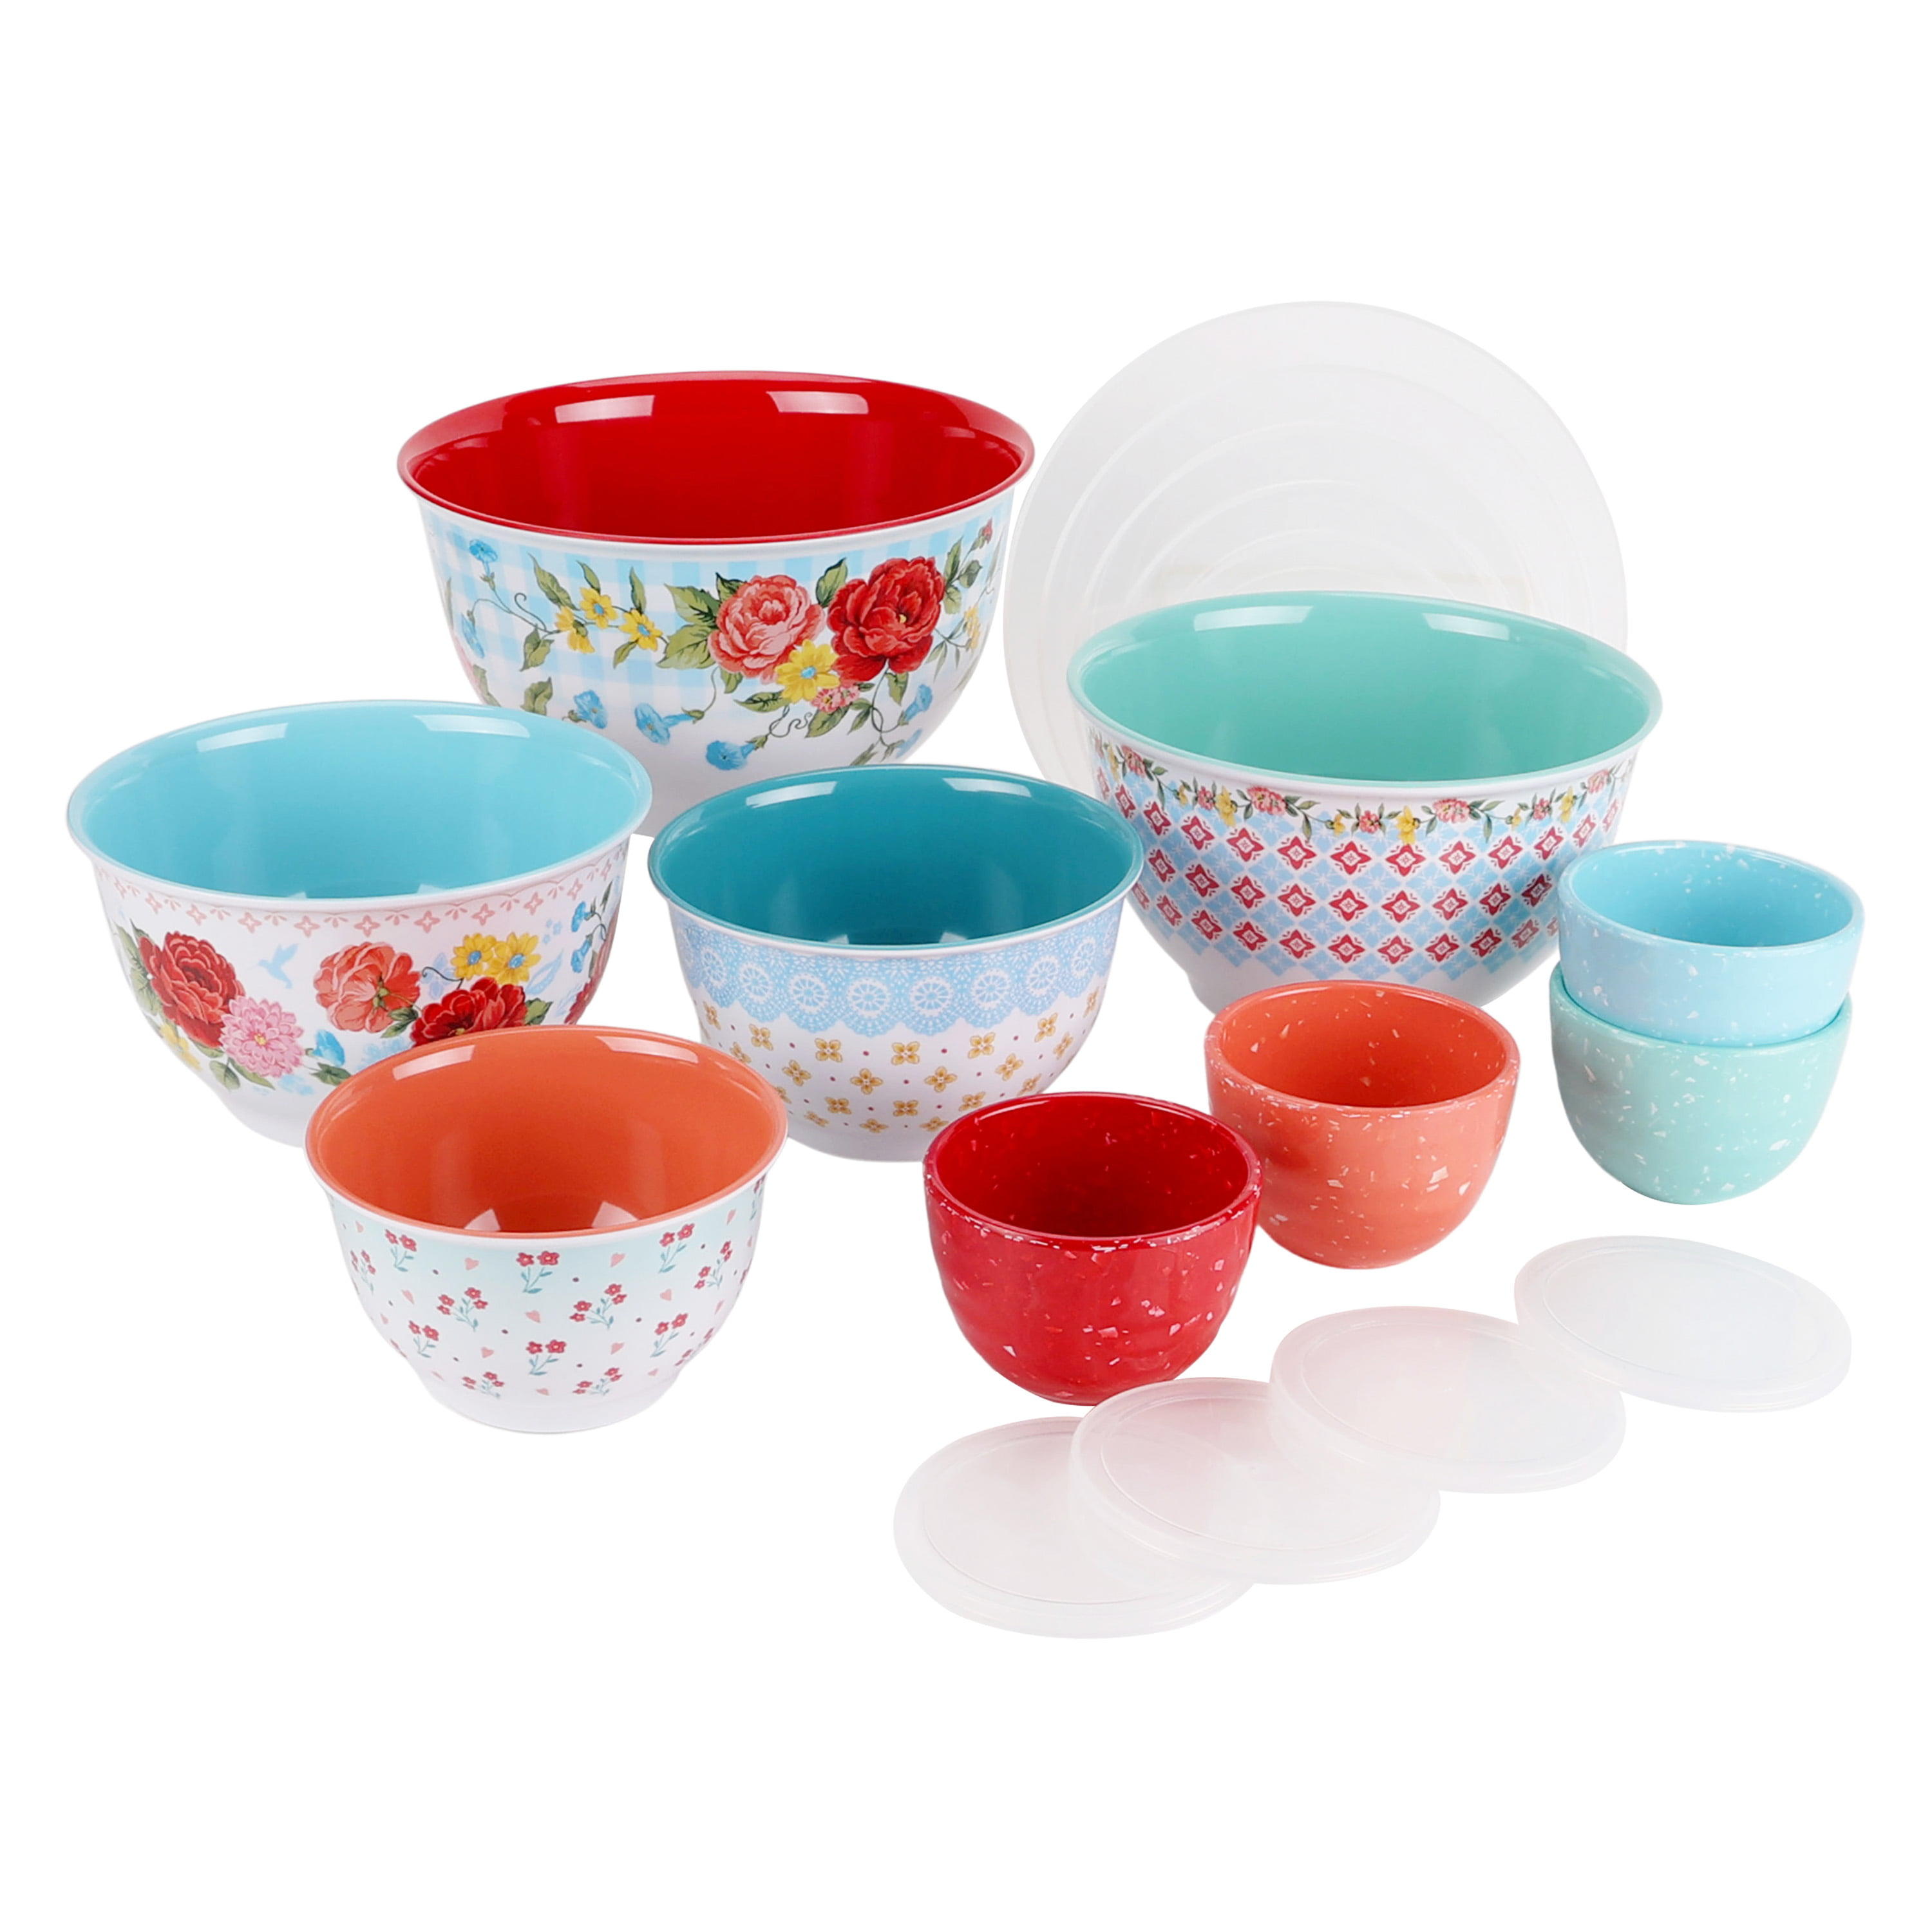 The Pioneer Woman Silicone Kitchen Utensils & Mixing Bowl 14-Piece